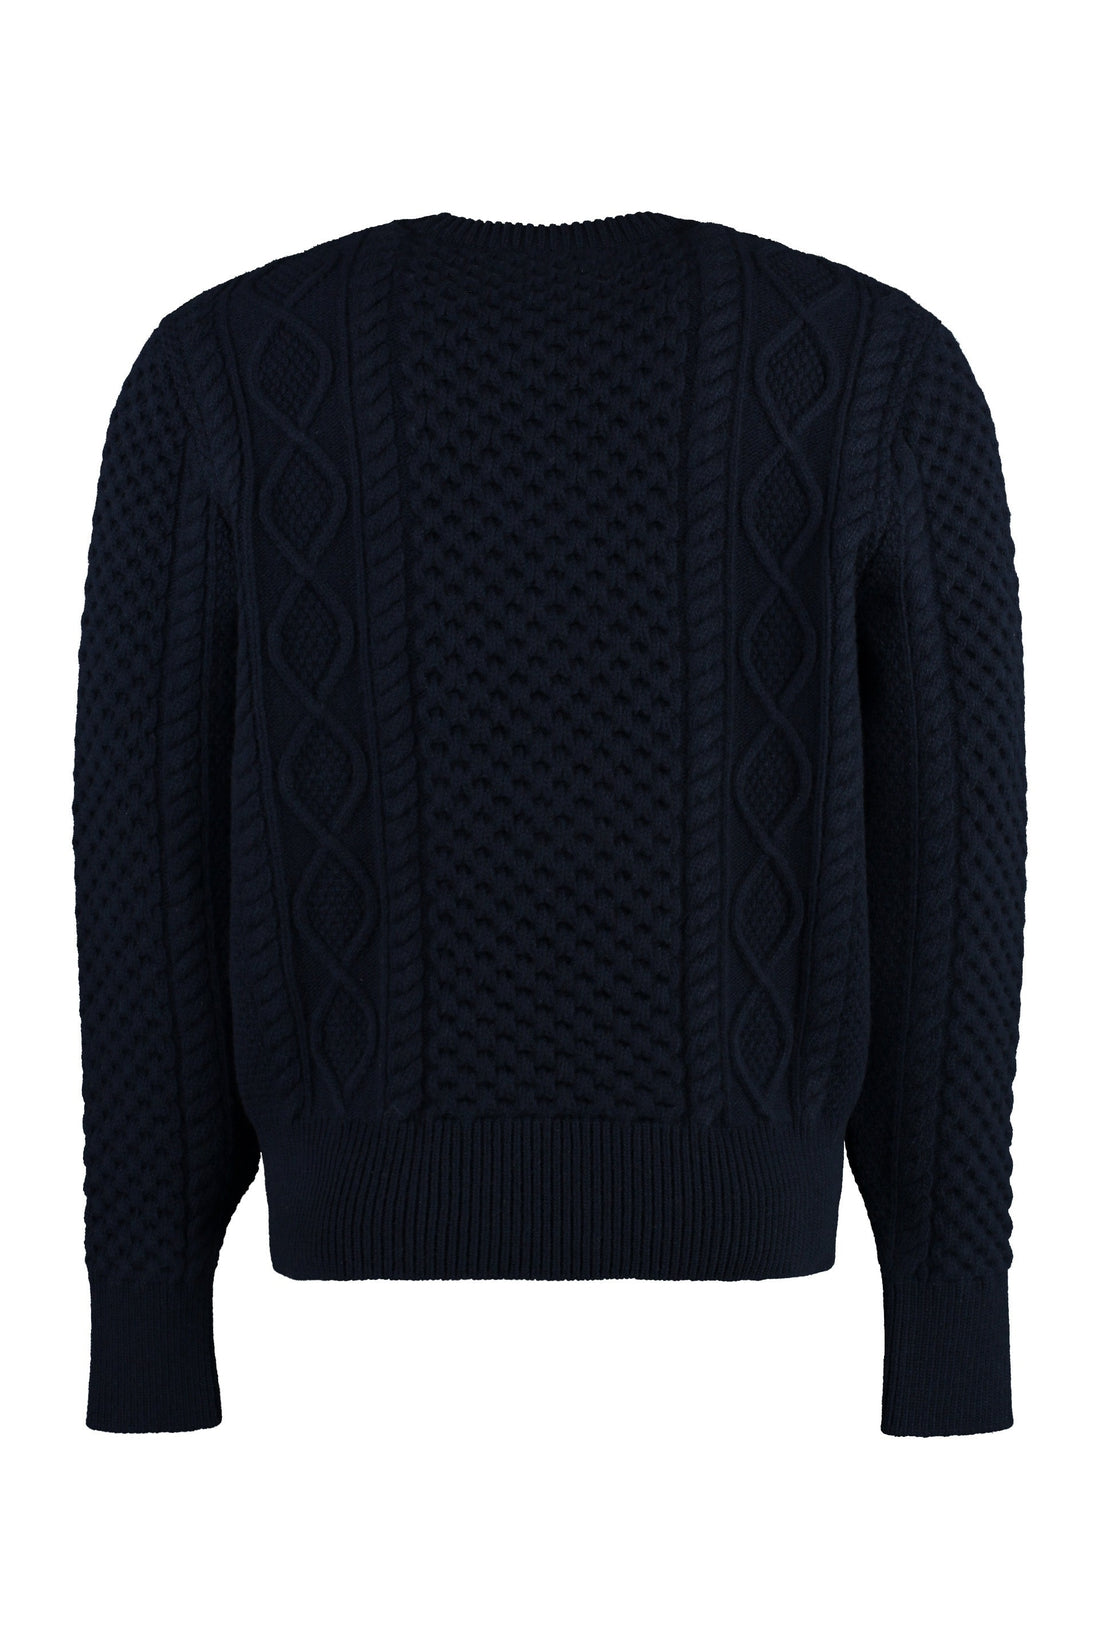 Bally-OUTLET-SALE-Wool sweater-ARCHIVIST